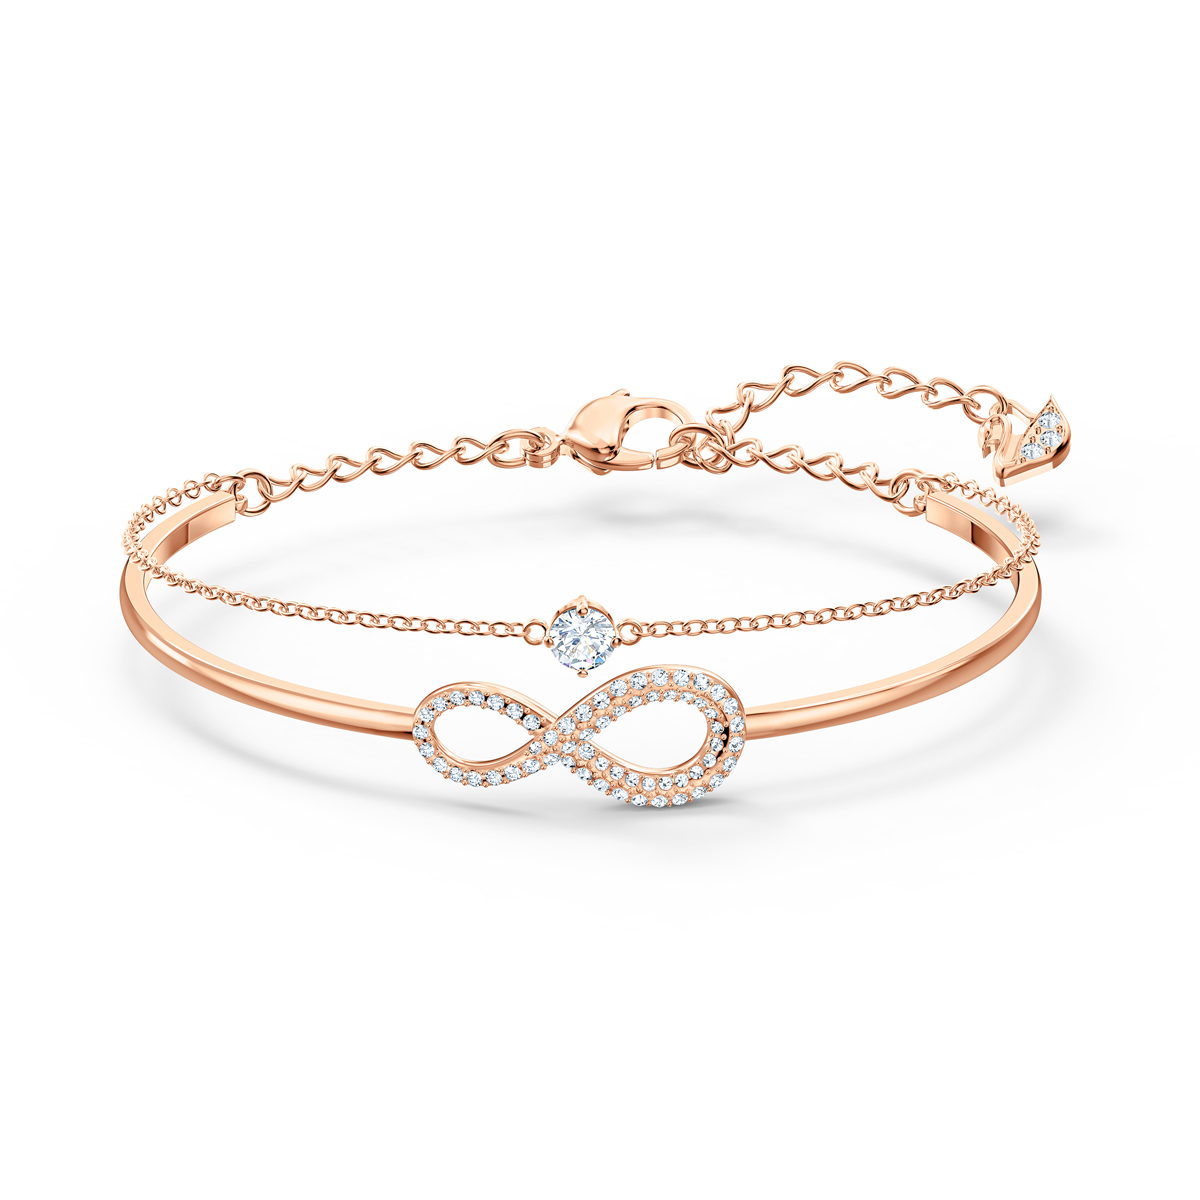 Swarovski Crystal and Rose Gold Bangle and Chain Infinity Bracelet